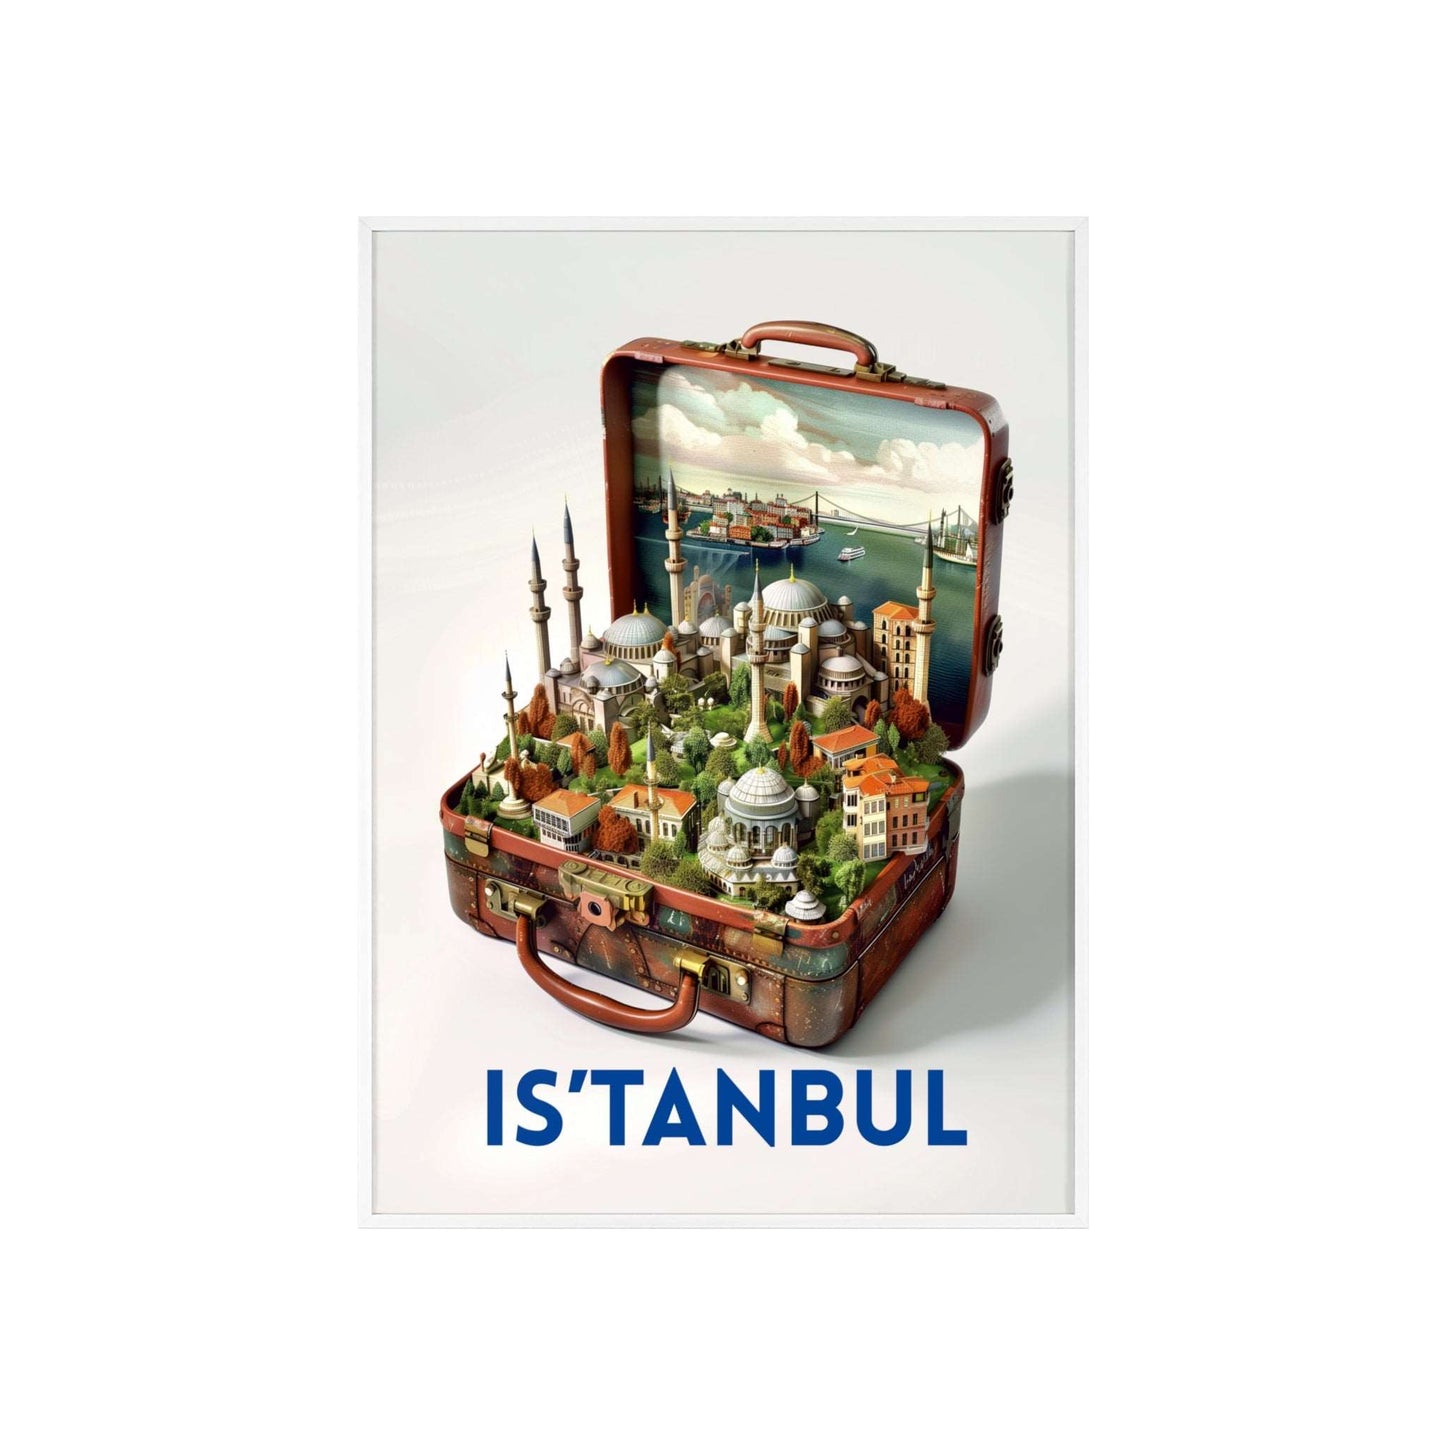 Elegant Istanbul in a Suitcase travel poster featuring iconic landmarks, inspiring wanderlust and a love for timeless travel